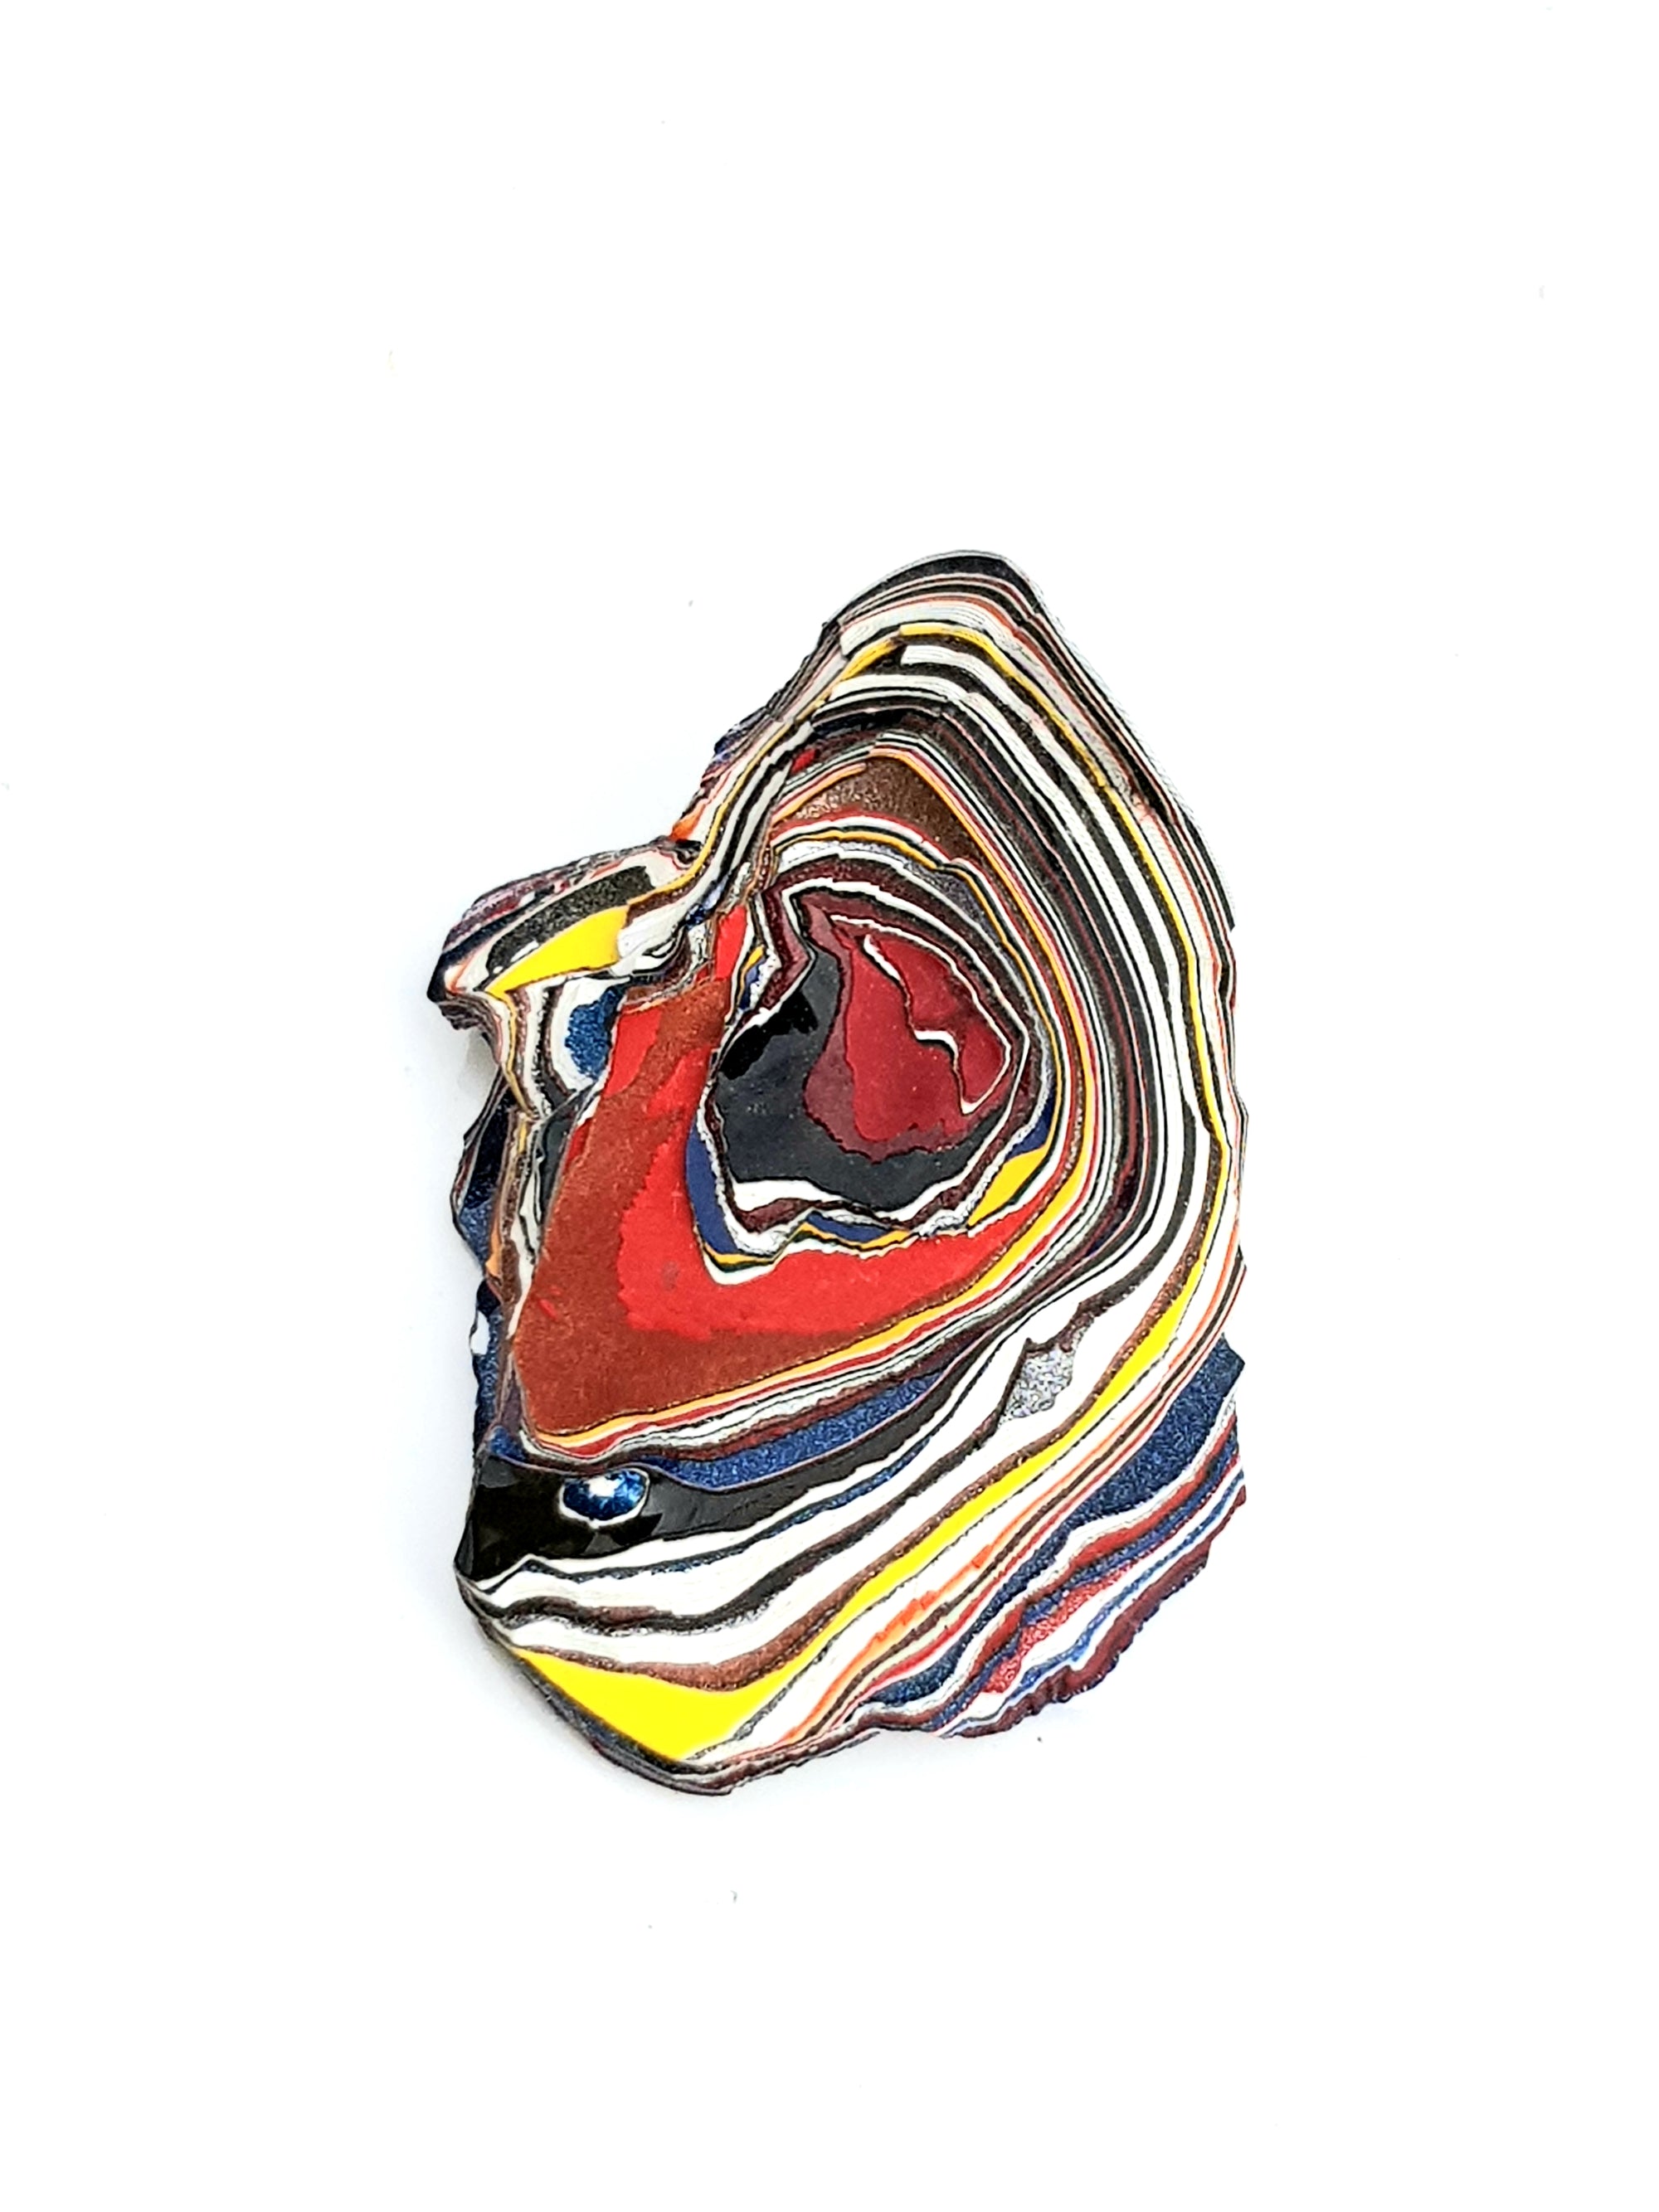 Raw fordite - The Science of Magic 